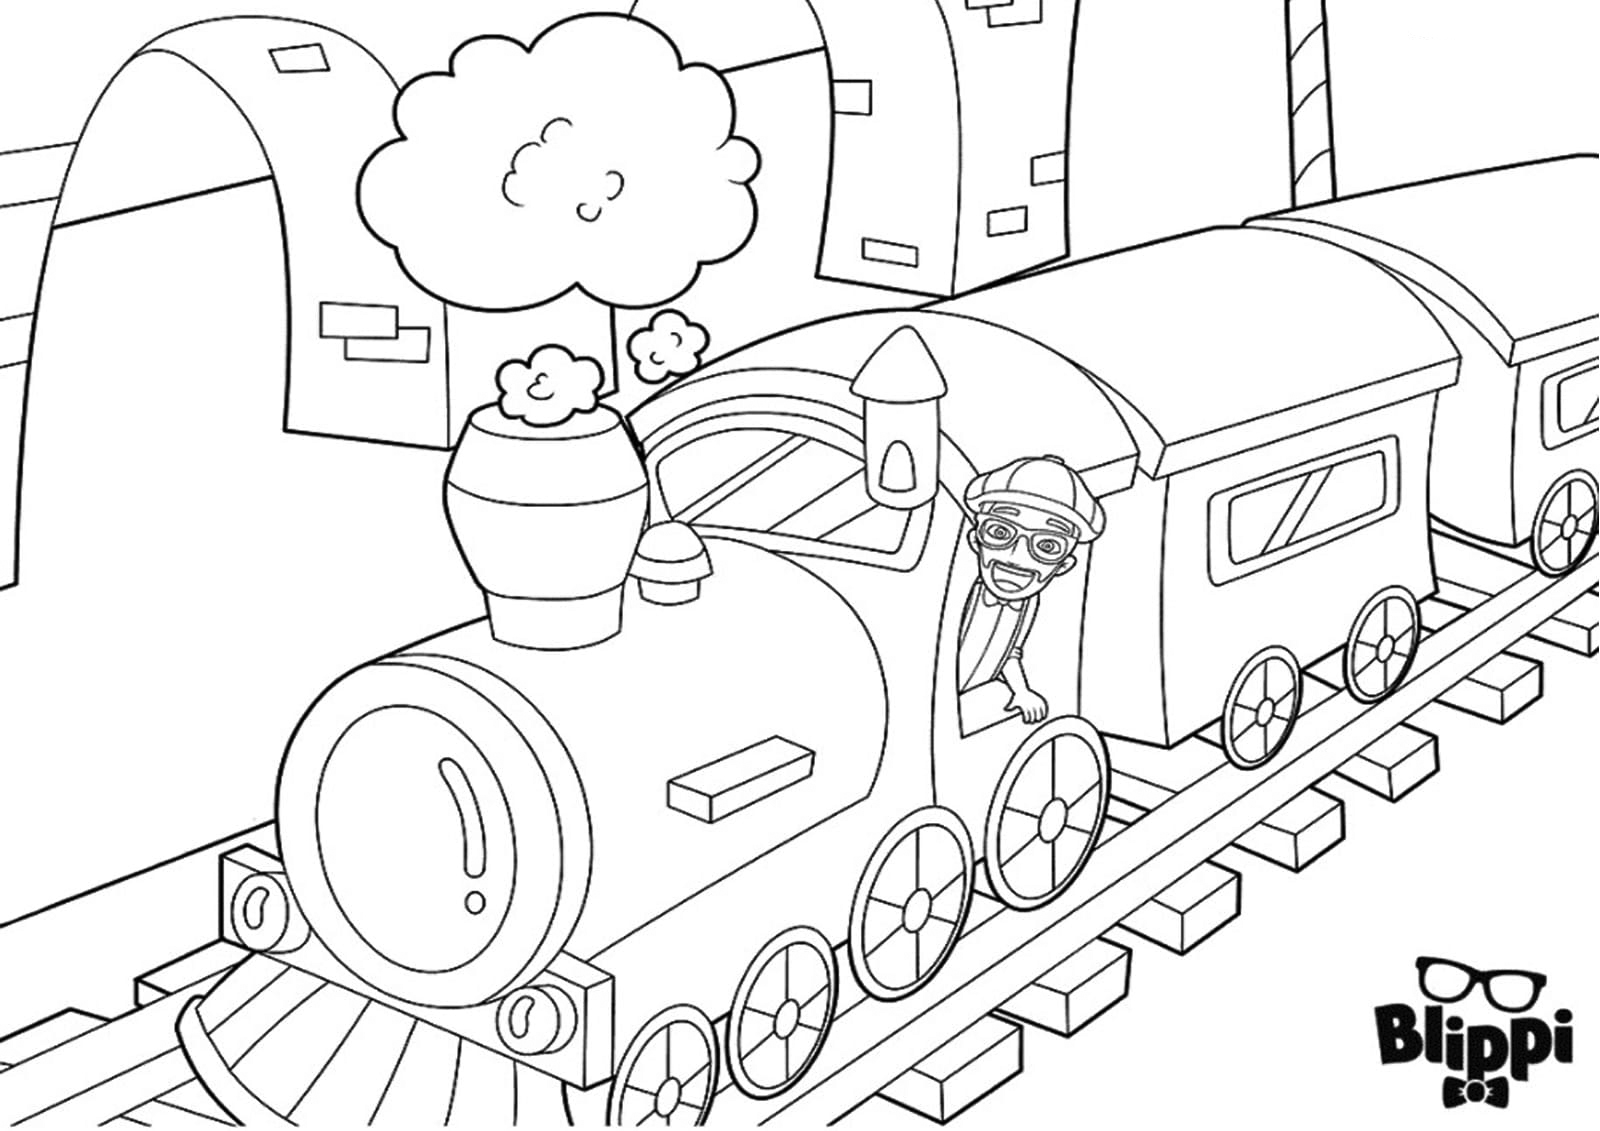 Blippi On A Train Coloring Pages